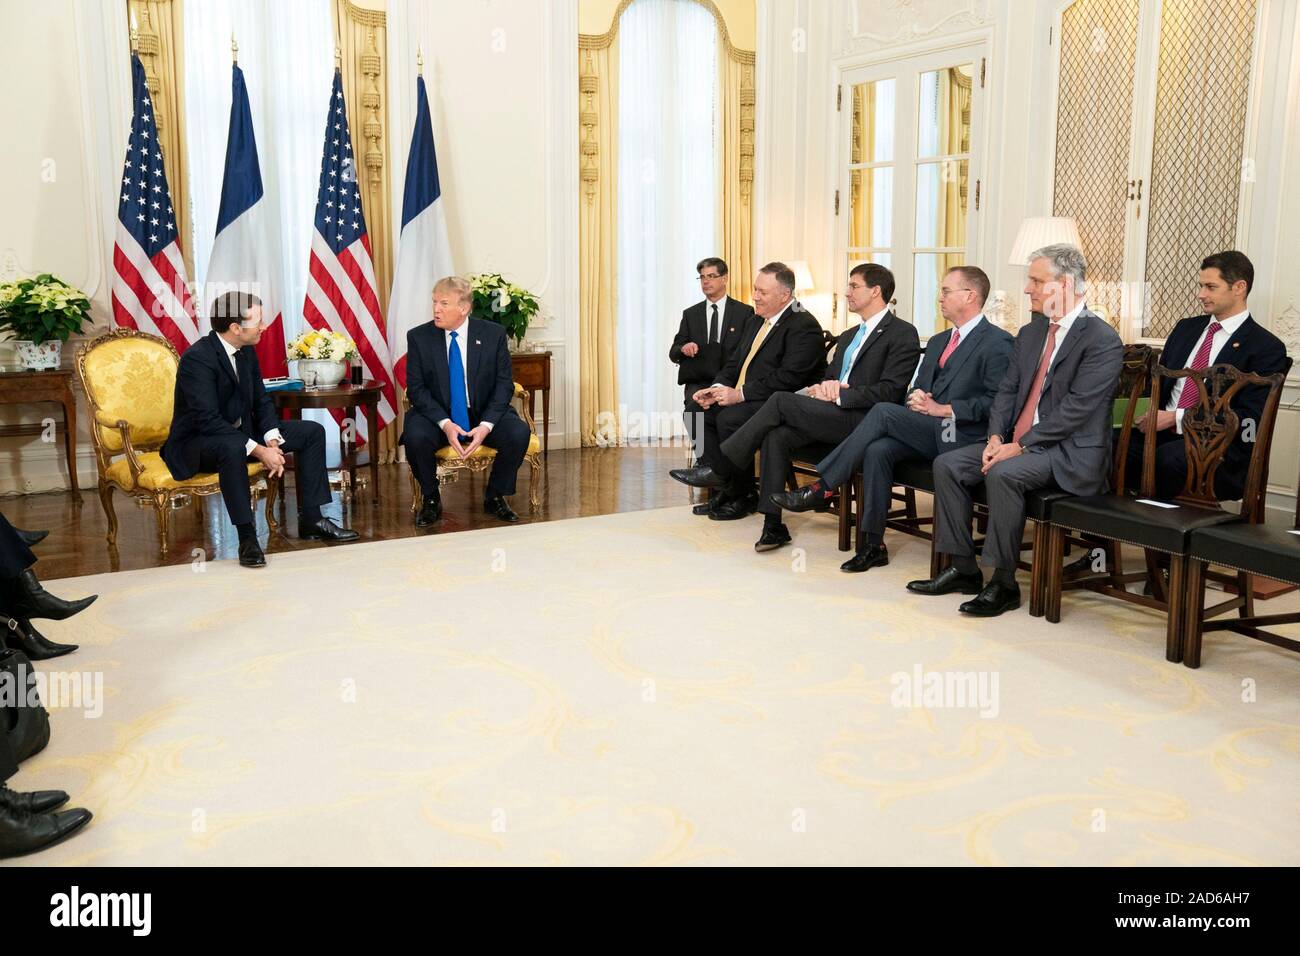 London, UK. 03 December, 2019. U.S. President Donald Trump and French President Emmanuel Macron pose for photographers prior to the start of their bilateral meeting before the NATO Summit at Winfield House December 3, 2019 in London, UK.   Credit: Shealah Craighead/Planetpix/Alamy Live News Stock Photo